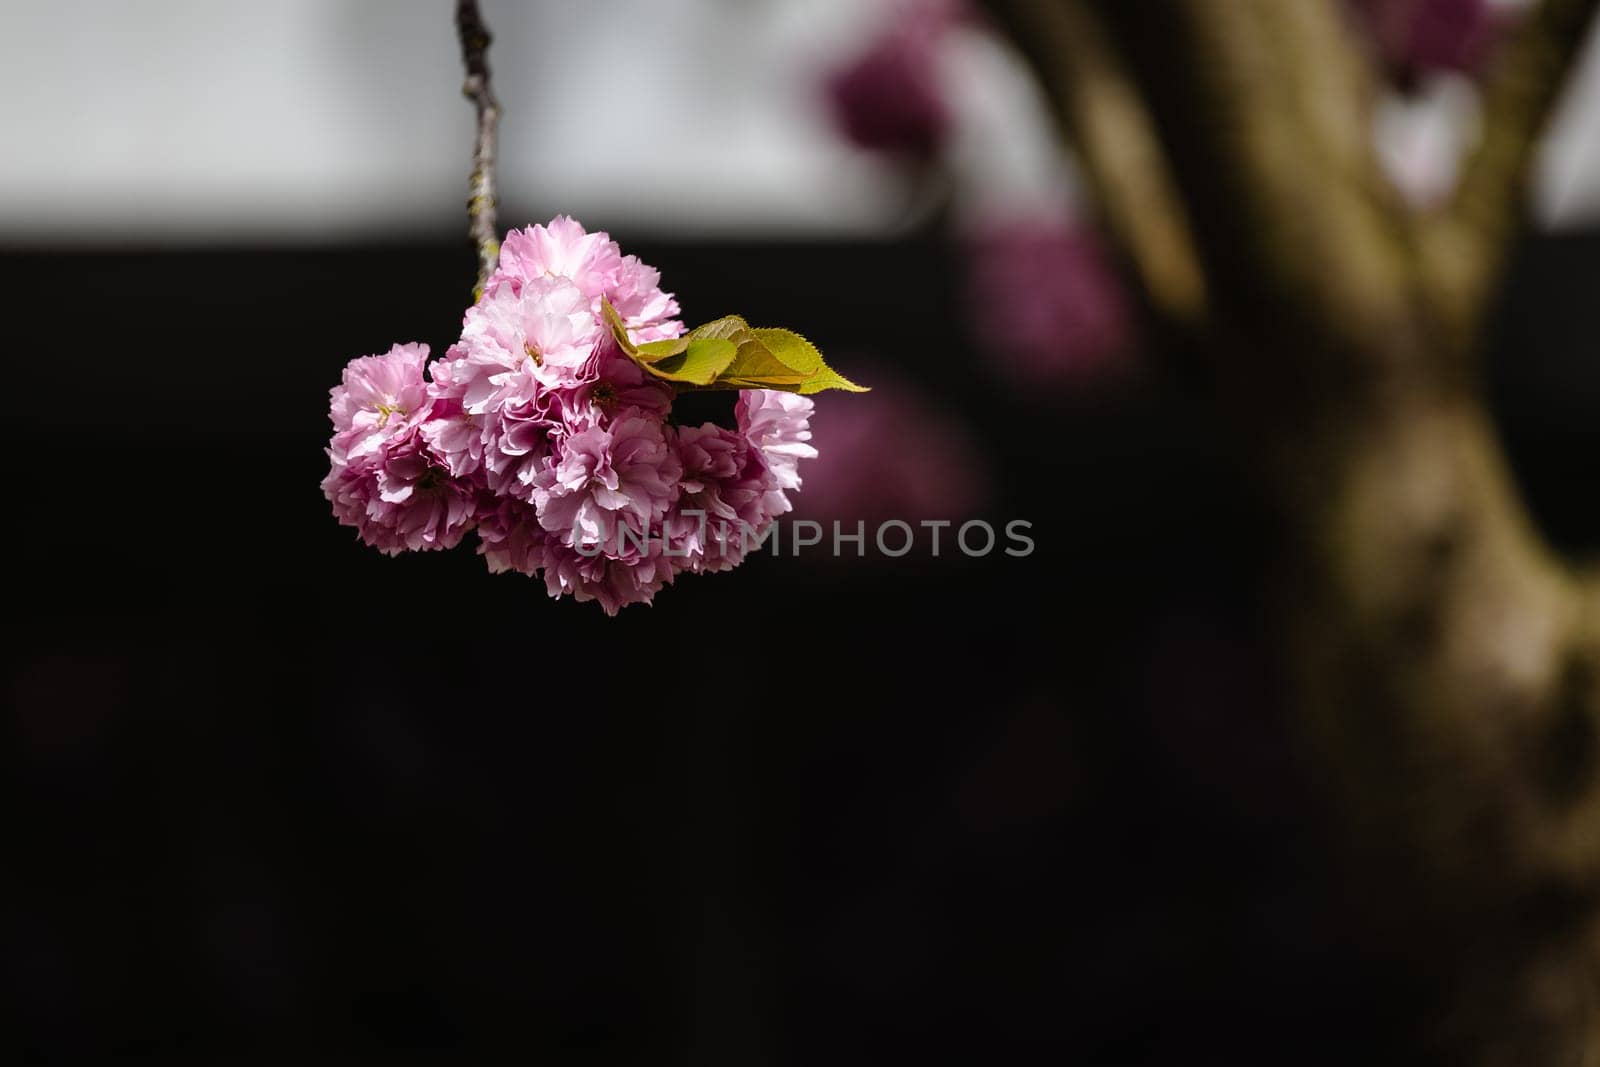 A single pink flower is hanging from a tree branch. The flower is the only thing visible in the image, and it is the main focus of the scene. The image has a serene and peaceful mood